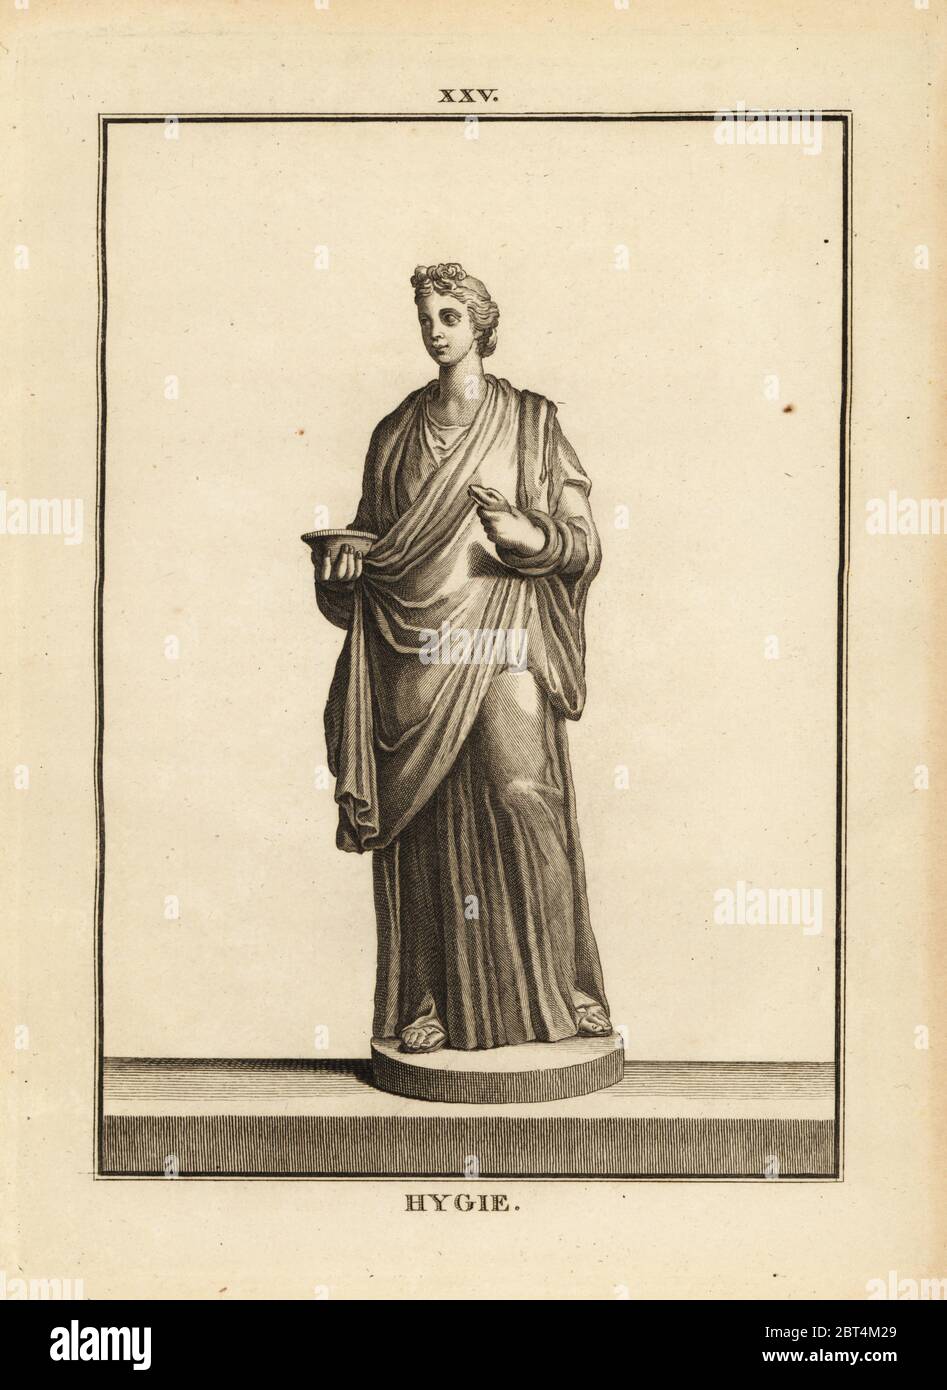 Hygieia, Greek and Roman goddess of health and cleanliness, daughter of the god of medicine Asclepius. Copperplate engraving by Francois-Anne David from Museum de Florence, ou Collection des Pierres Gravees, Statues, Medailles, Chez F.A. David, Paris, 1787. David (1741-1824) drew and engraved the illustrations based on Roman statues, engraved stones and medals in the collection of the Museum de Florence and the cabinet of curiosities of the Grand Duke of Tuscany. Stock Photo